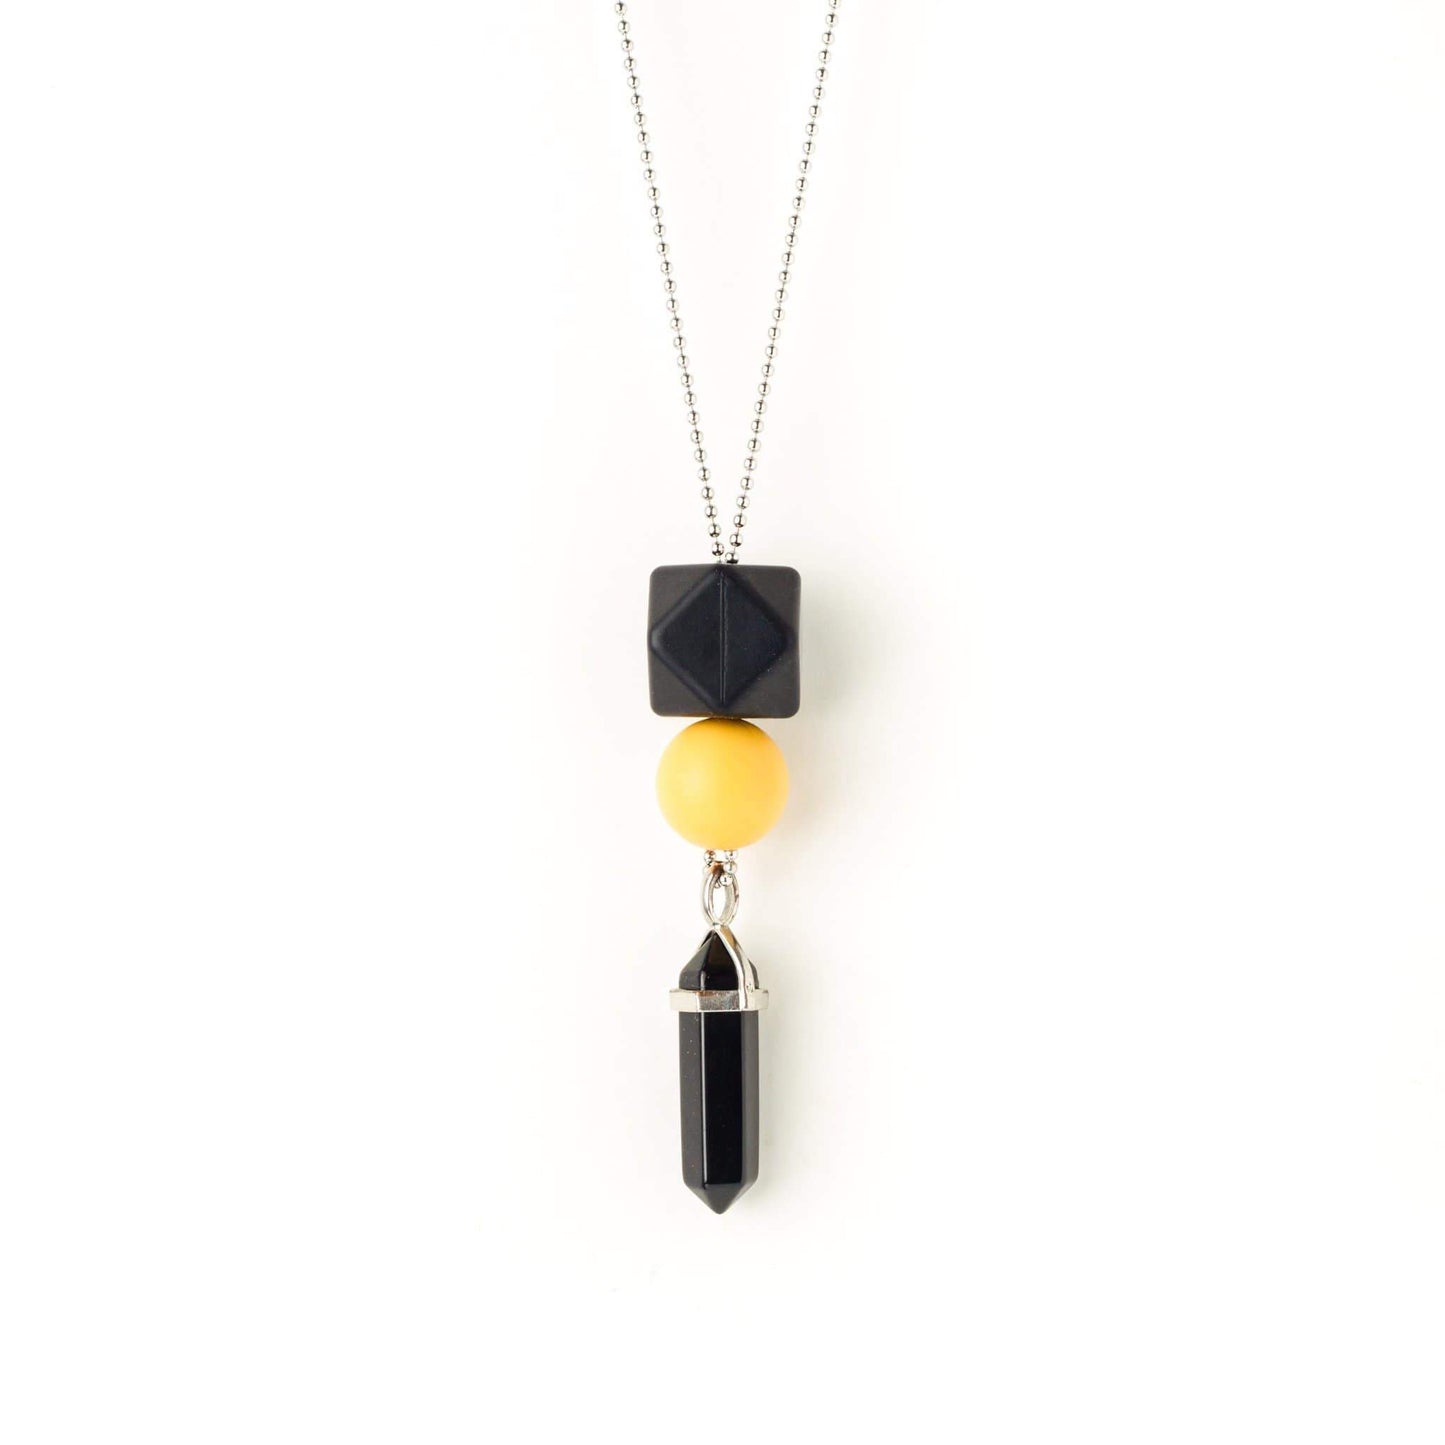 crystal-jewellery-for-gifts CHARITY | R U OK NECKLACE GOLD & SILVER